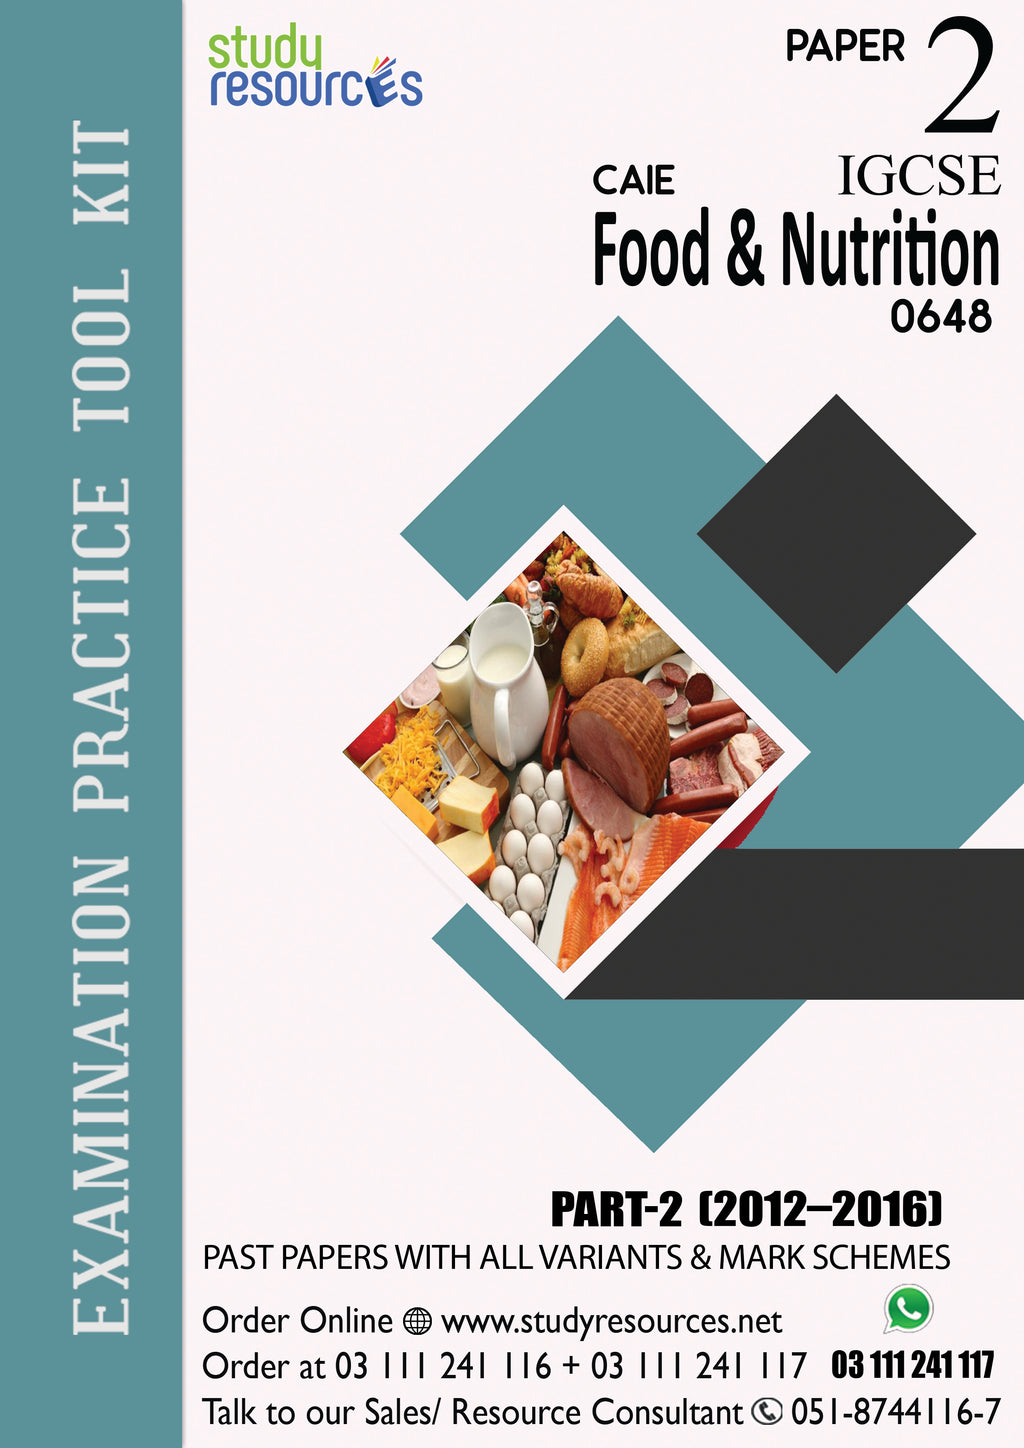 Cambridge IGCSE Food and Nutrition (0648) P-2 Past Papers Part-2 (2012-2016)